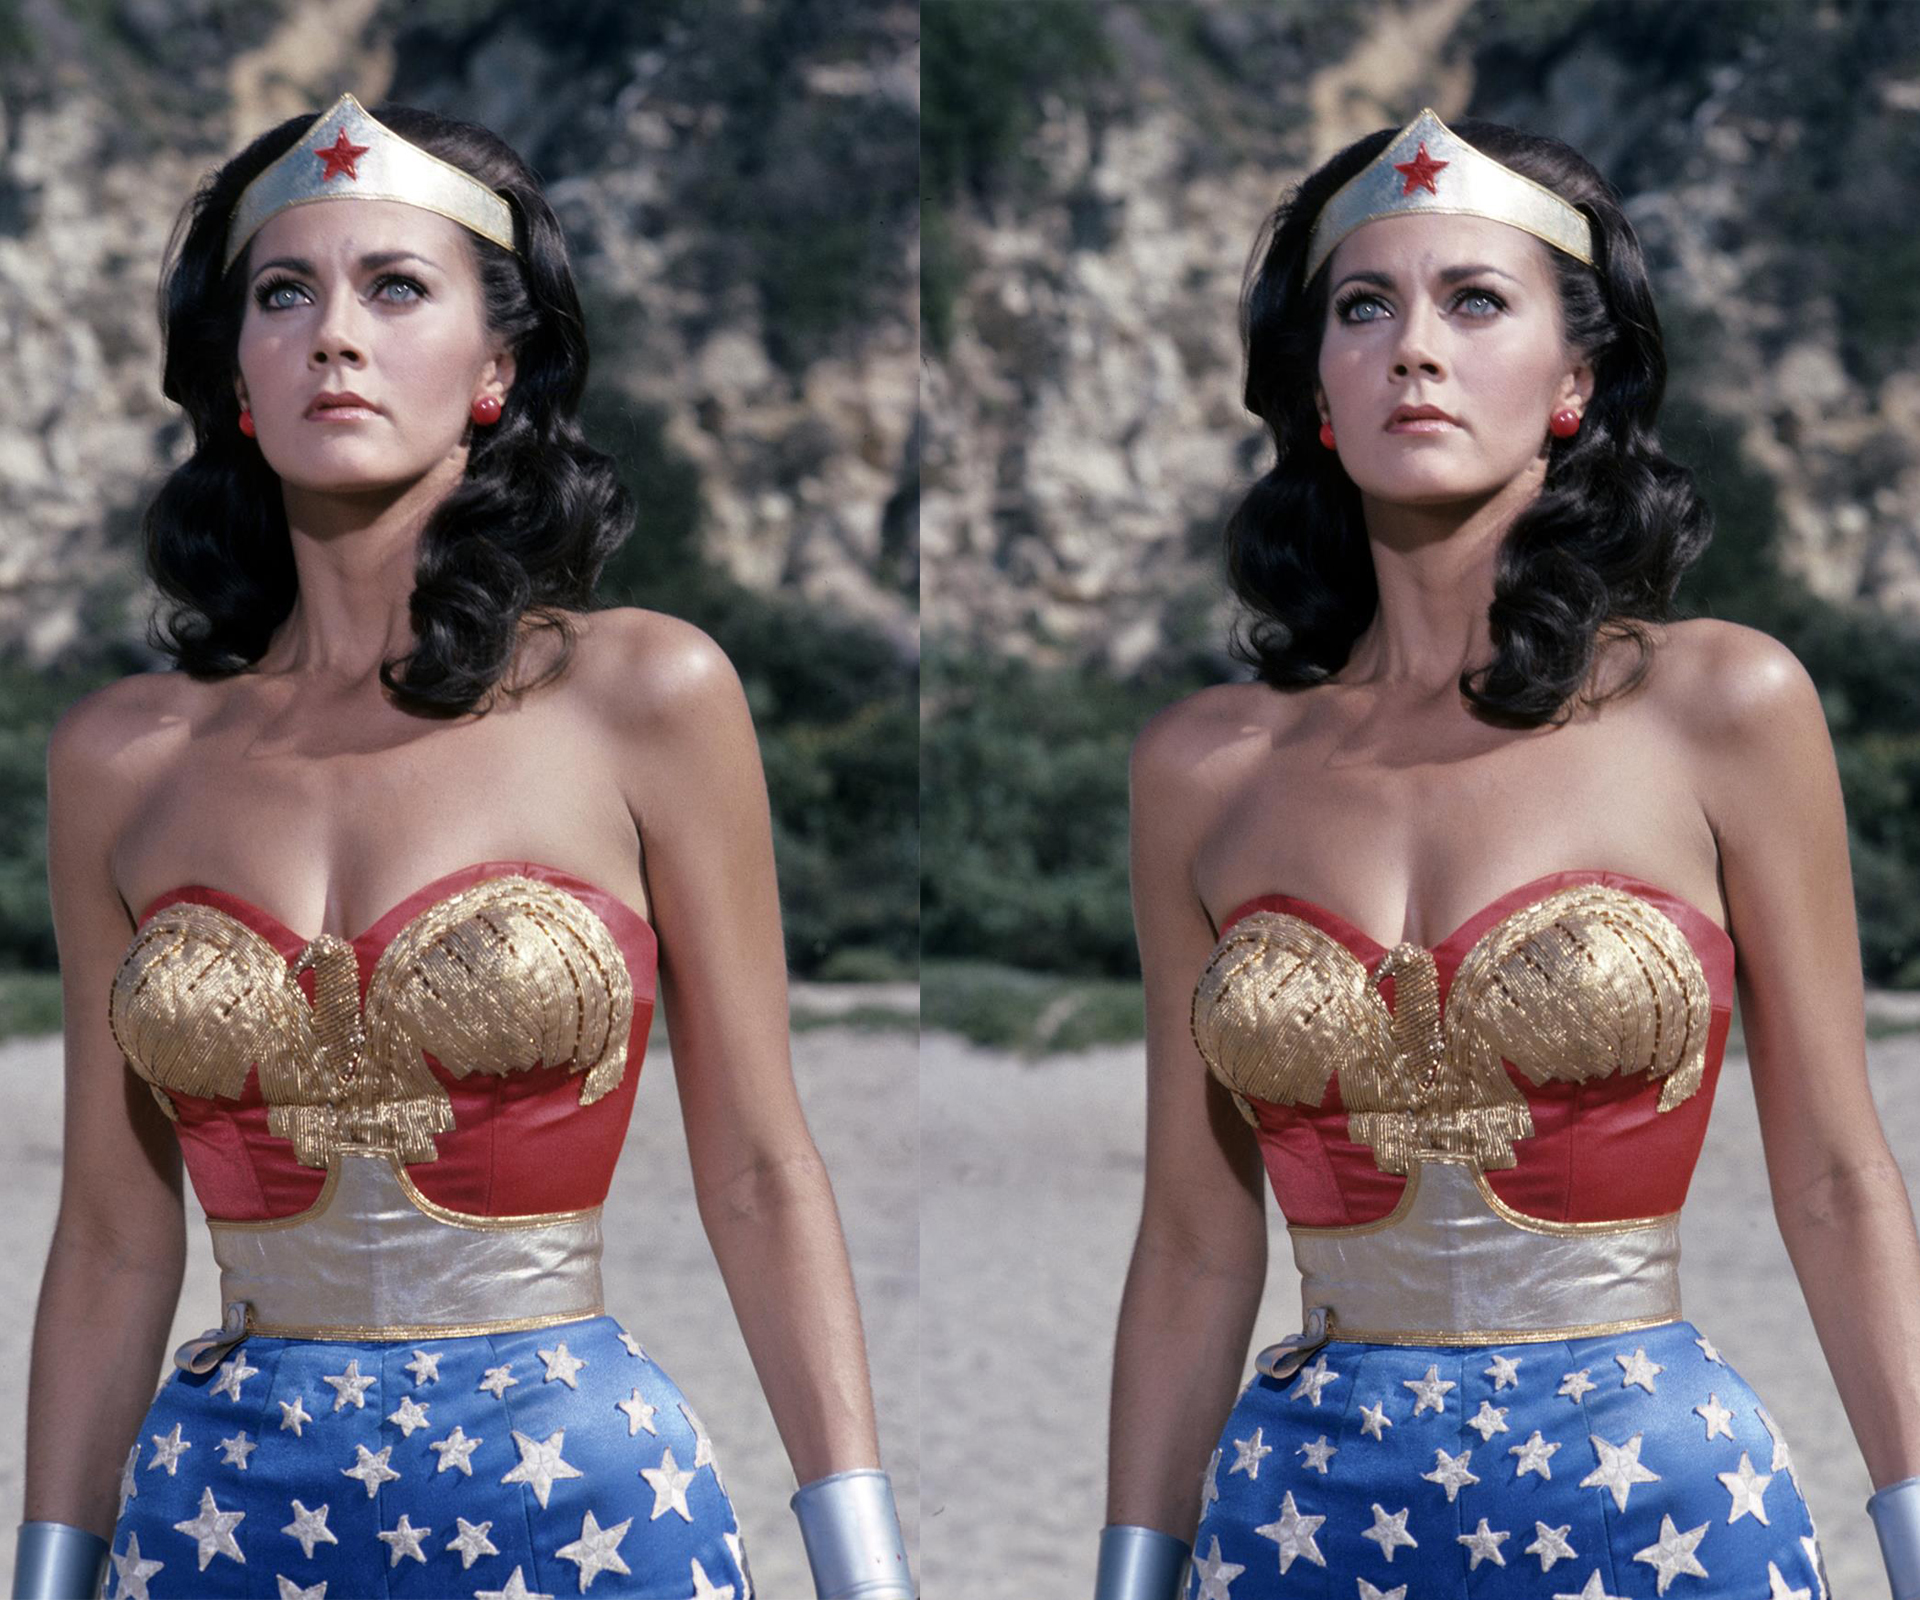 Why being Wonder Woman is overrated